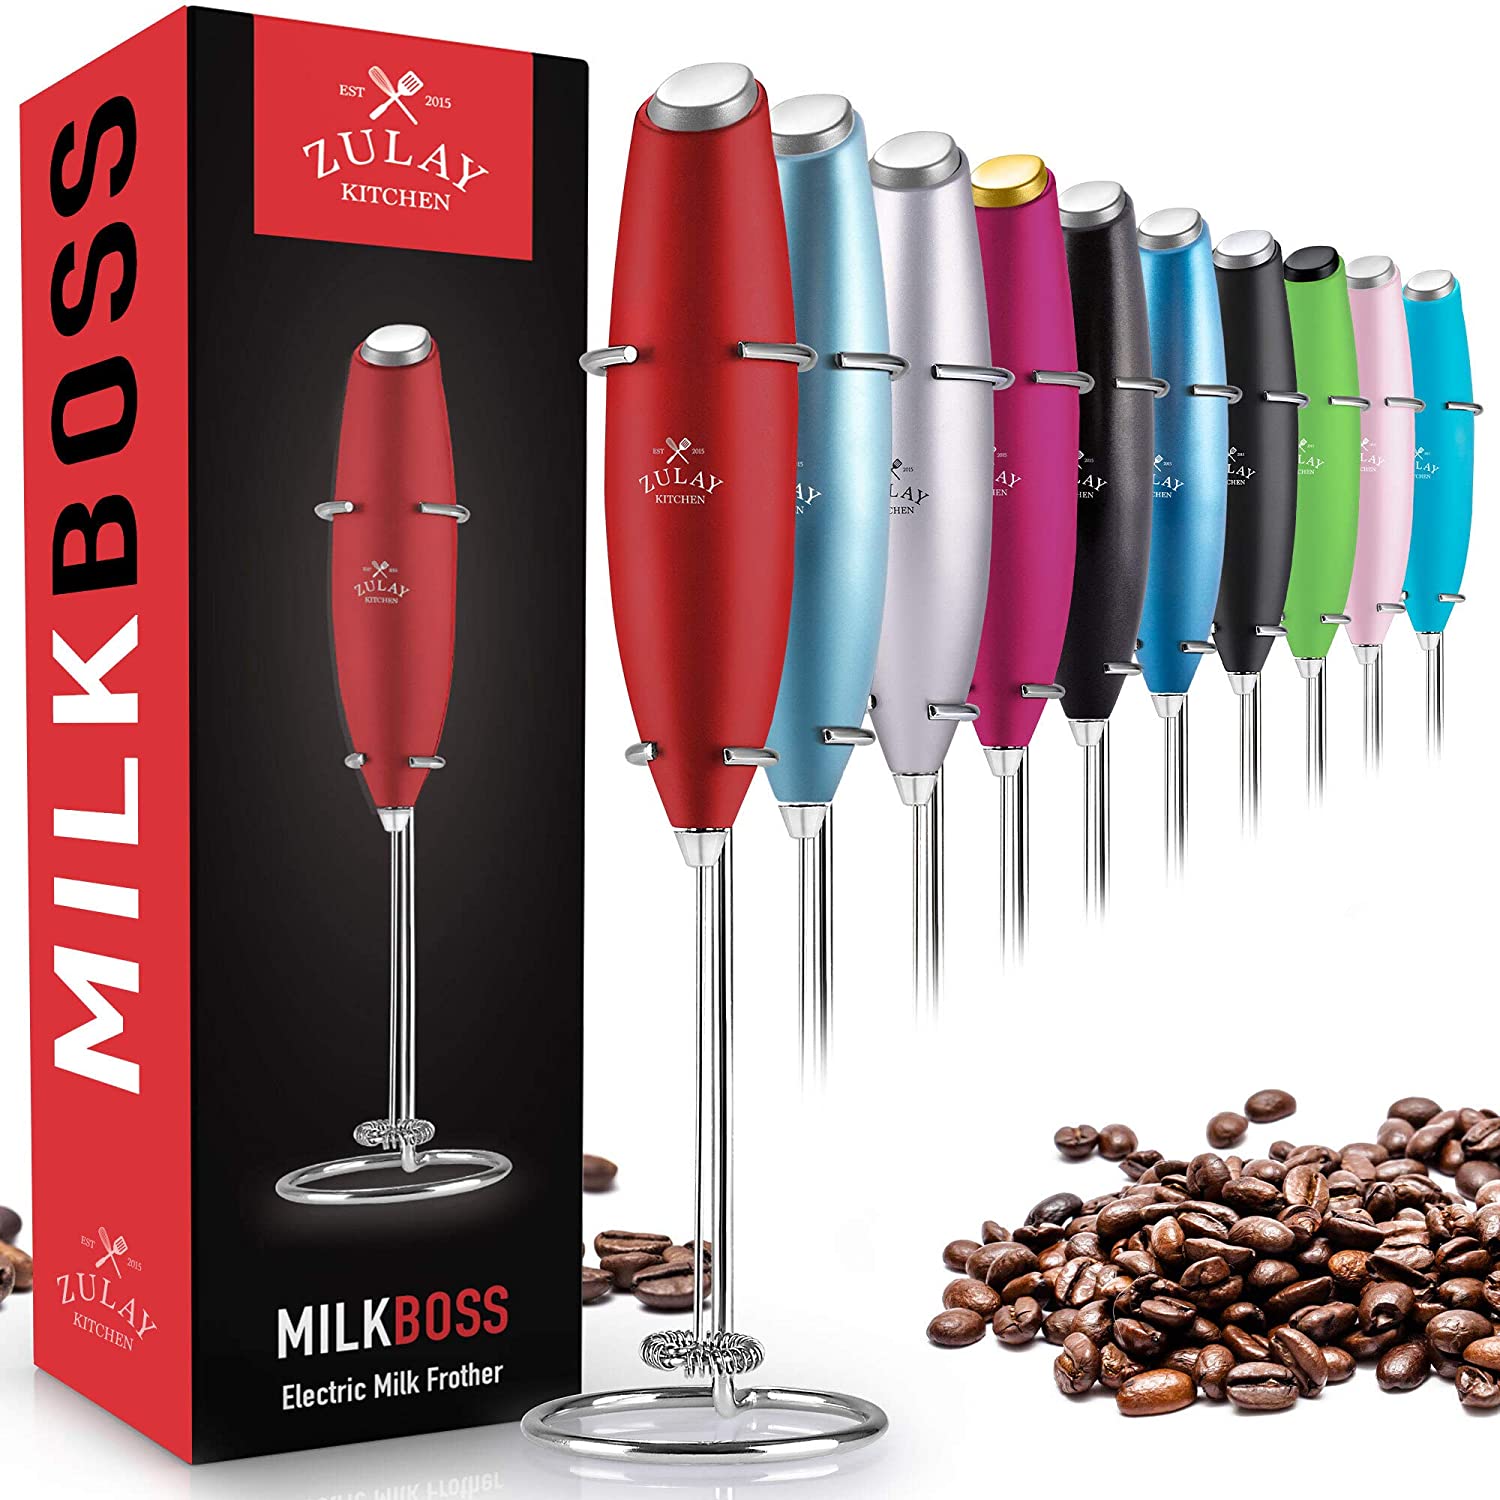 Zulay Kitchen MILK BOSS Milk Frother With Stand - Ruby Red, 1 - City Market